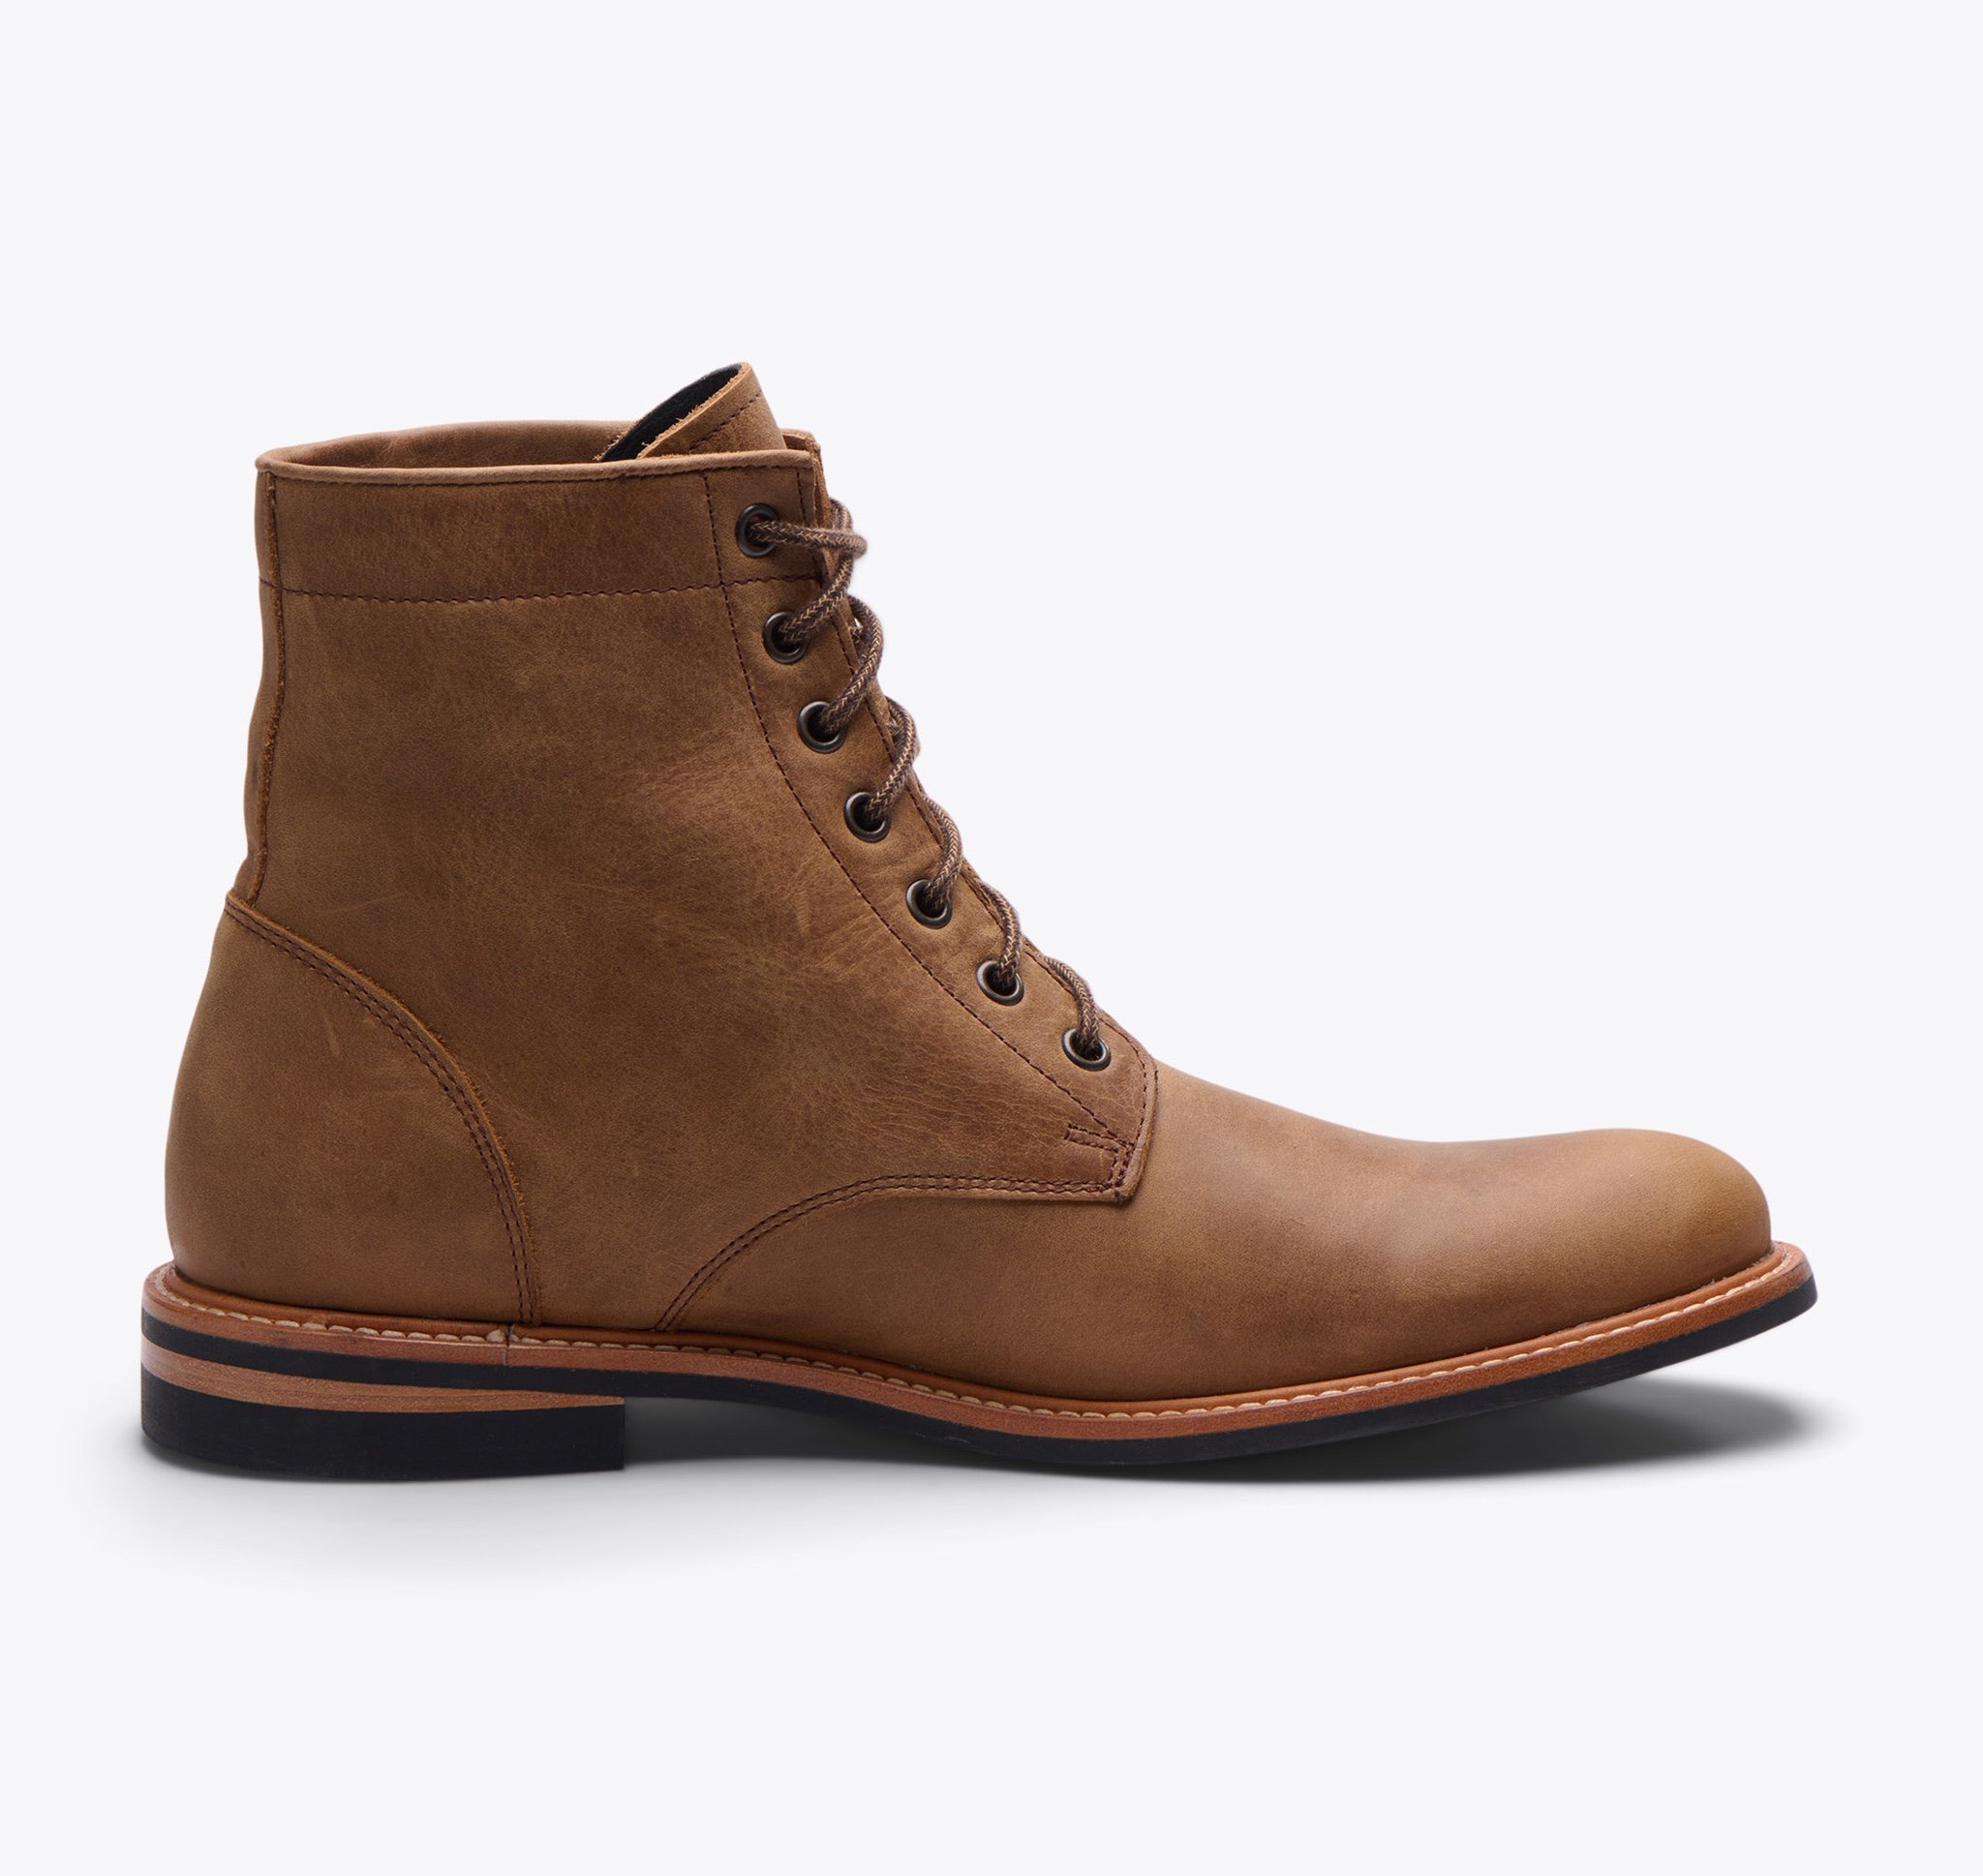 Nisolo All-Weather Andres Boot Tobacco - Every Nisolo product is built on the foundation of comfort, function, and design. 